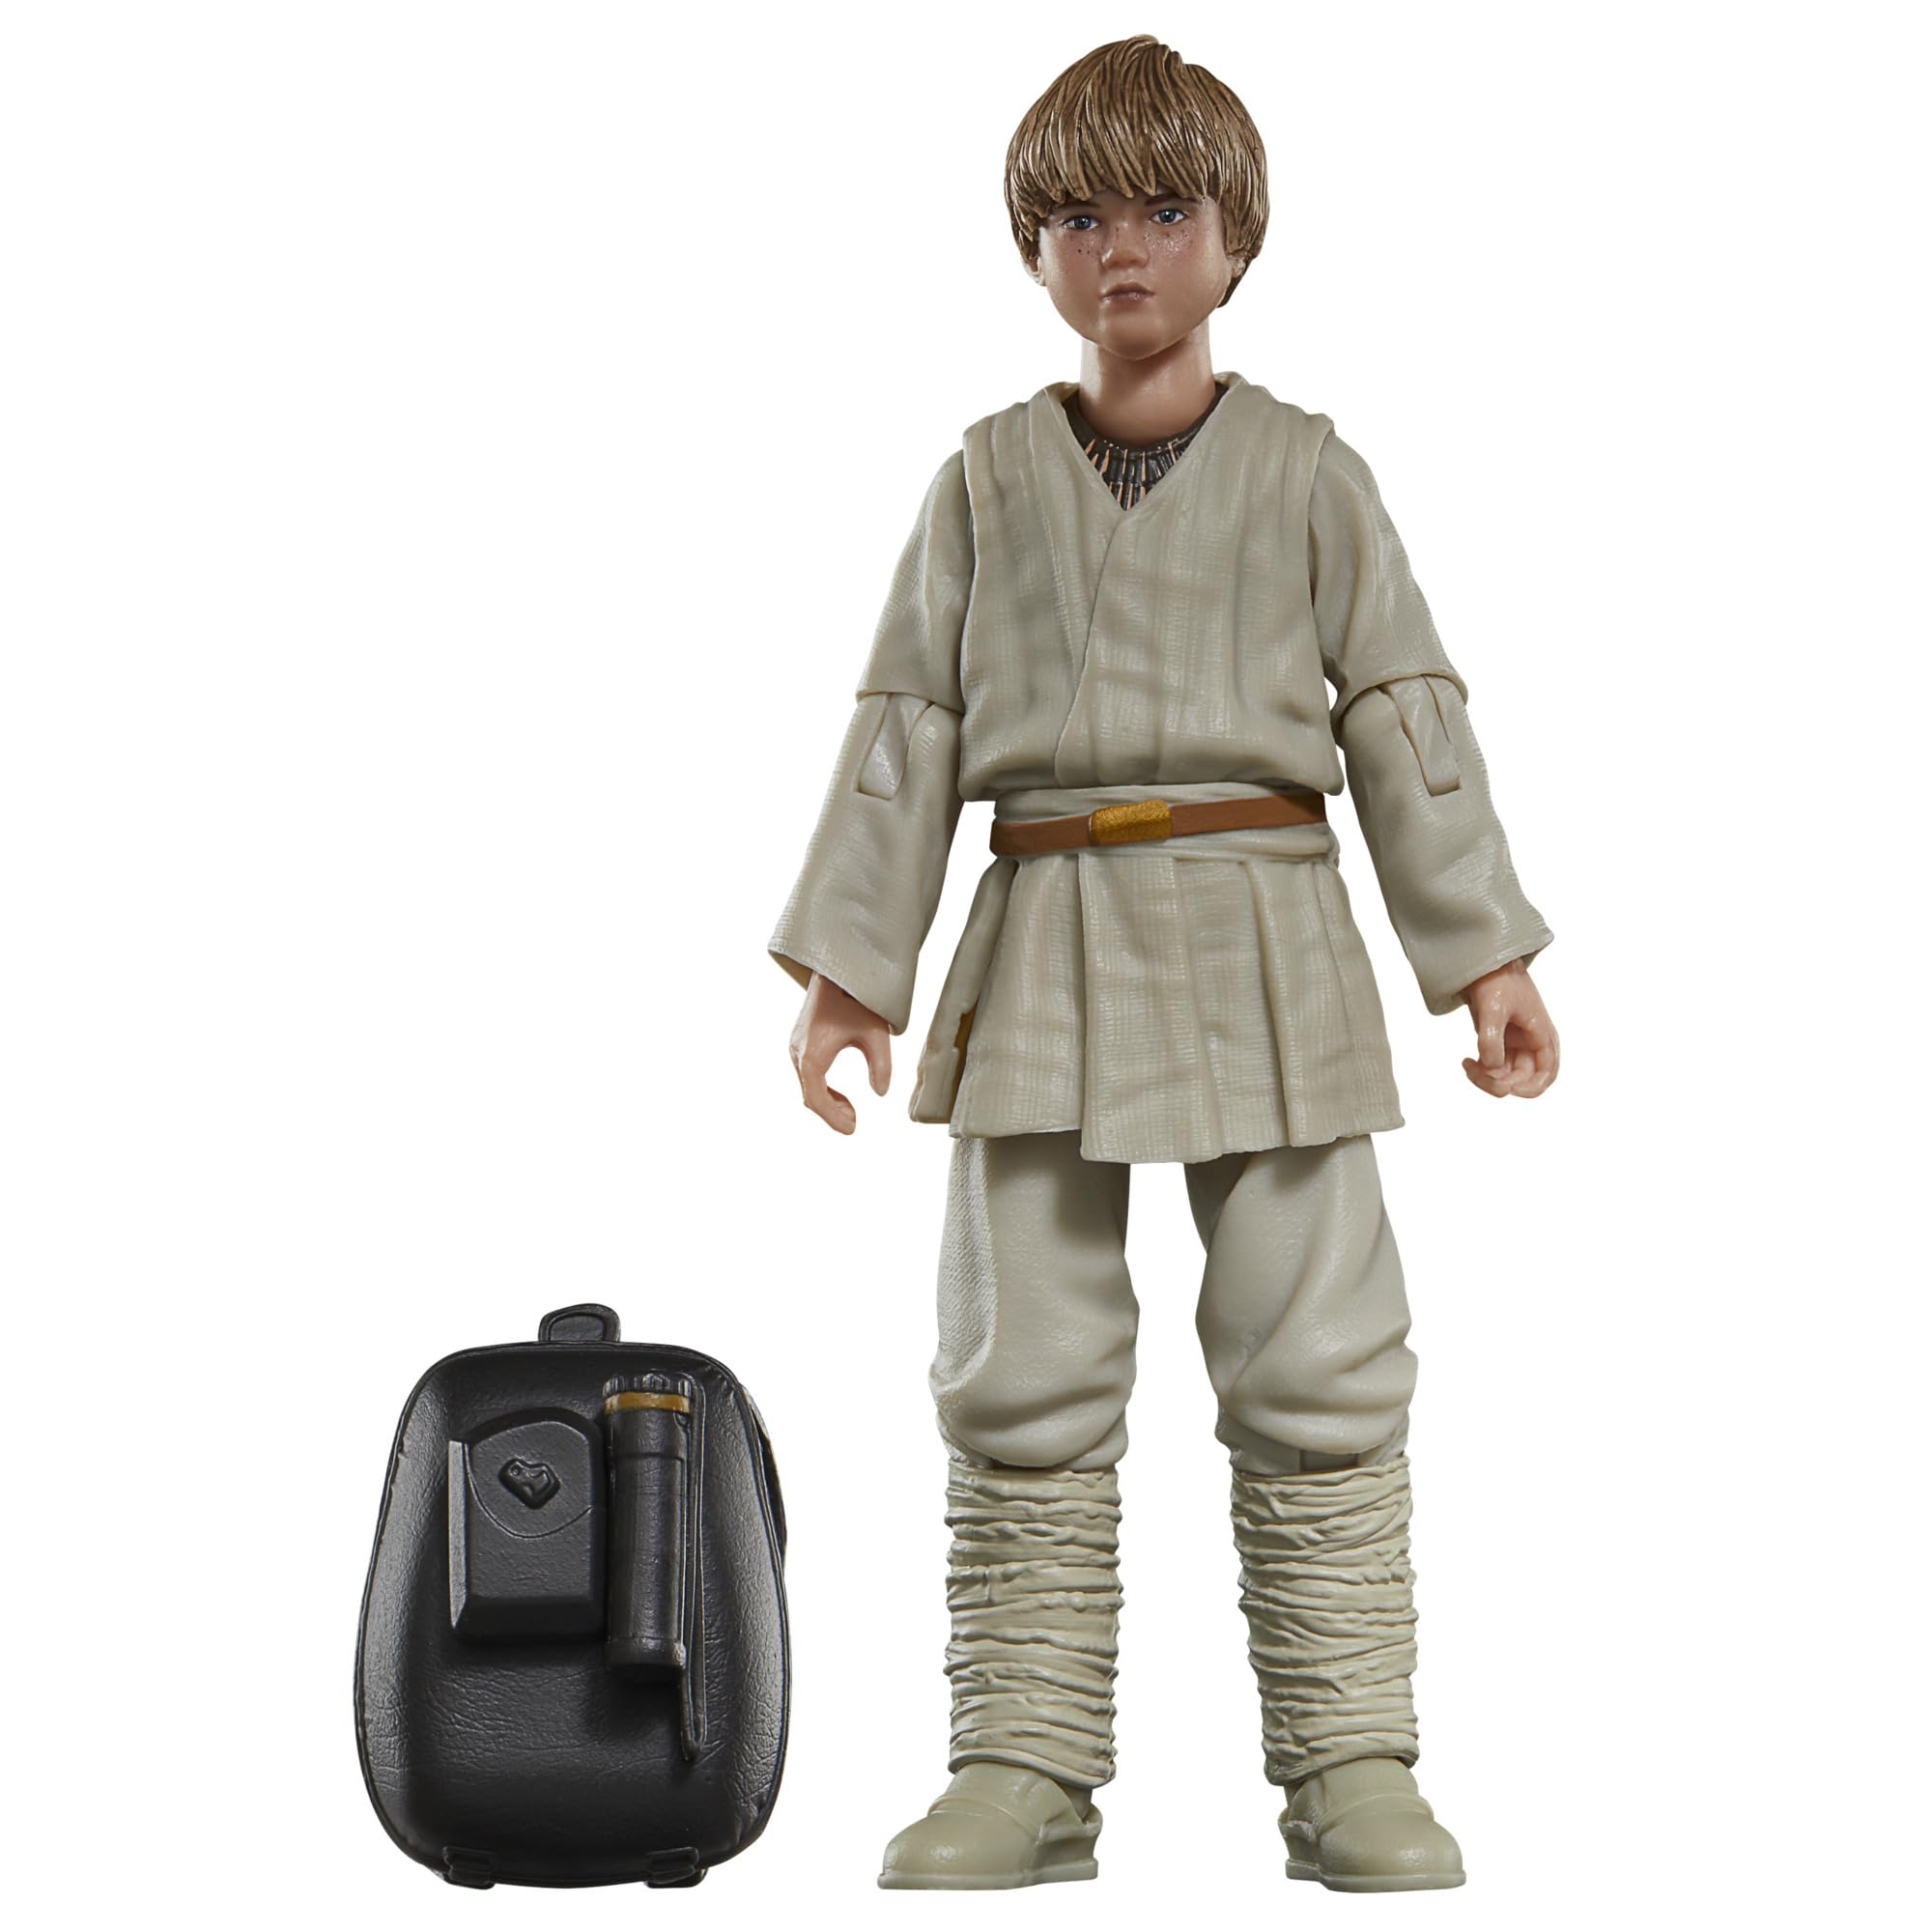 STAR WARS The Black Series Anakin Skywalker, The Phantom Menace Collectible 6-Inch Action Figure, Ages 4 and Up